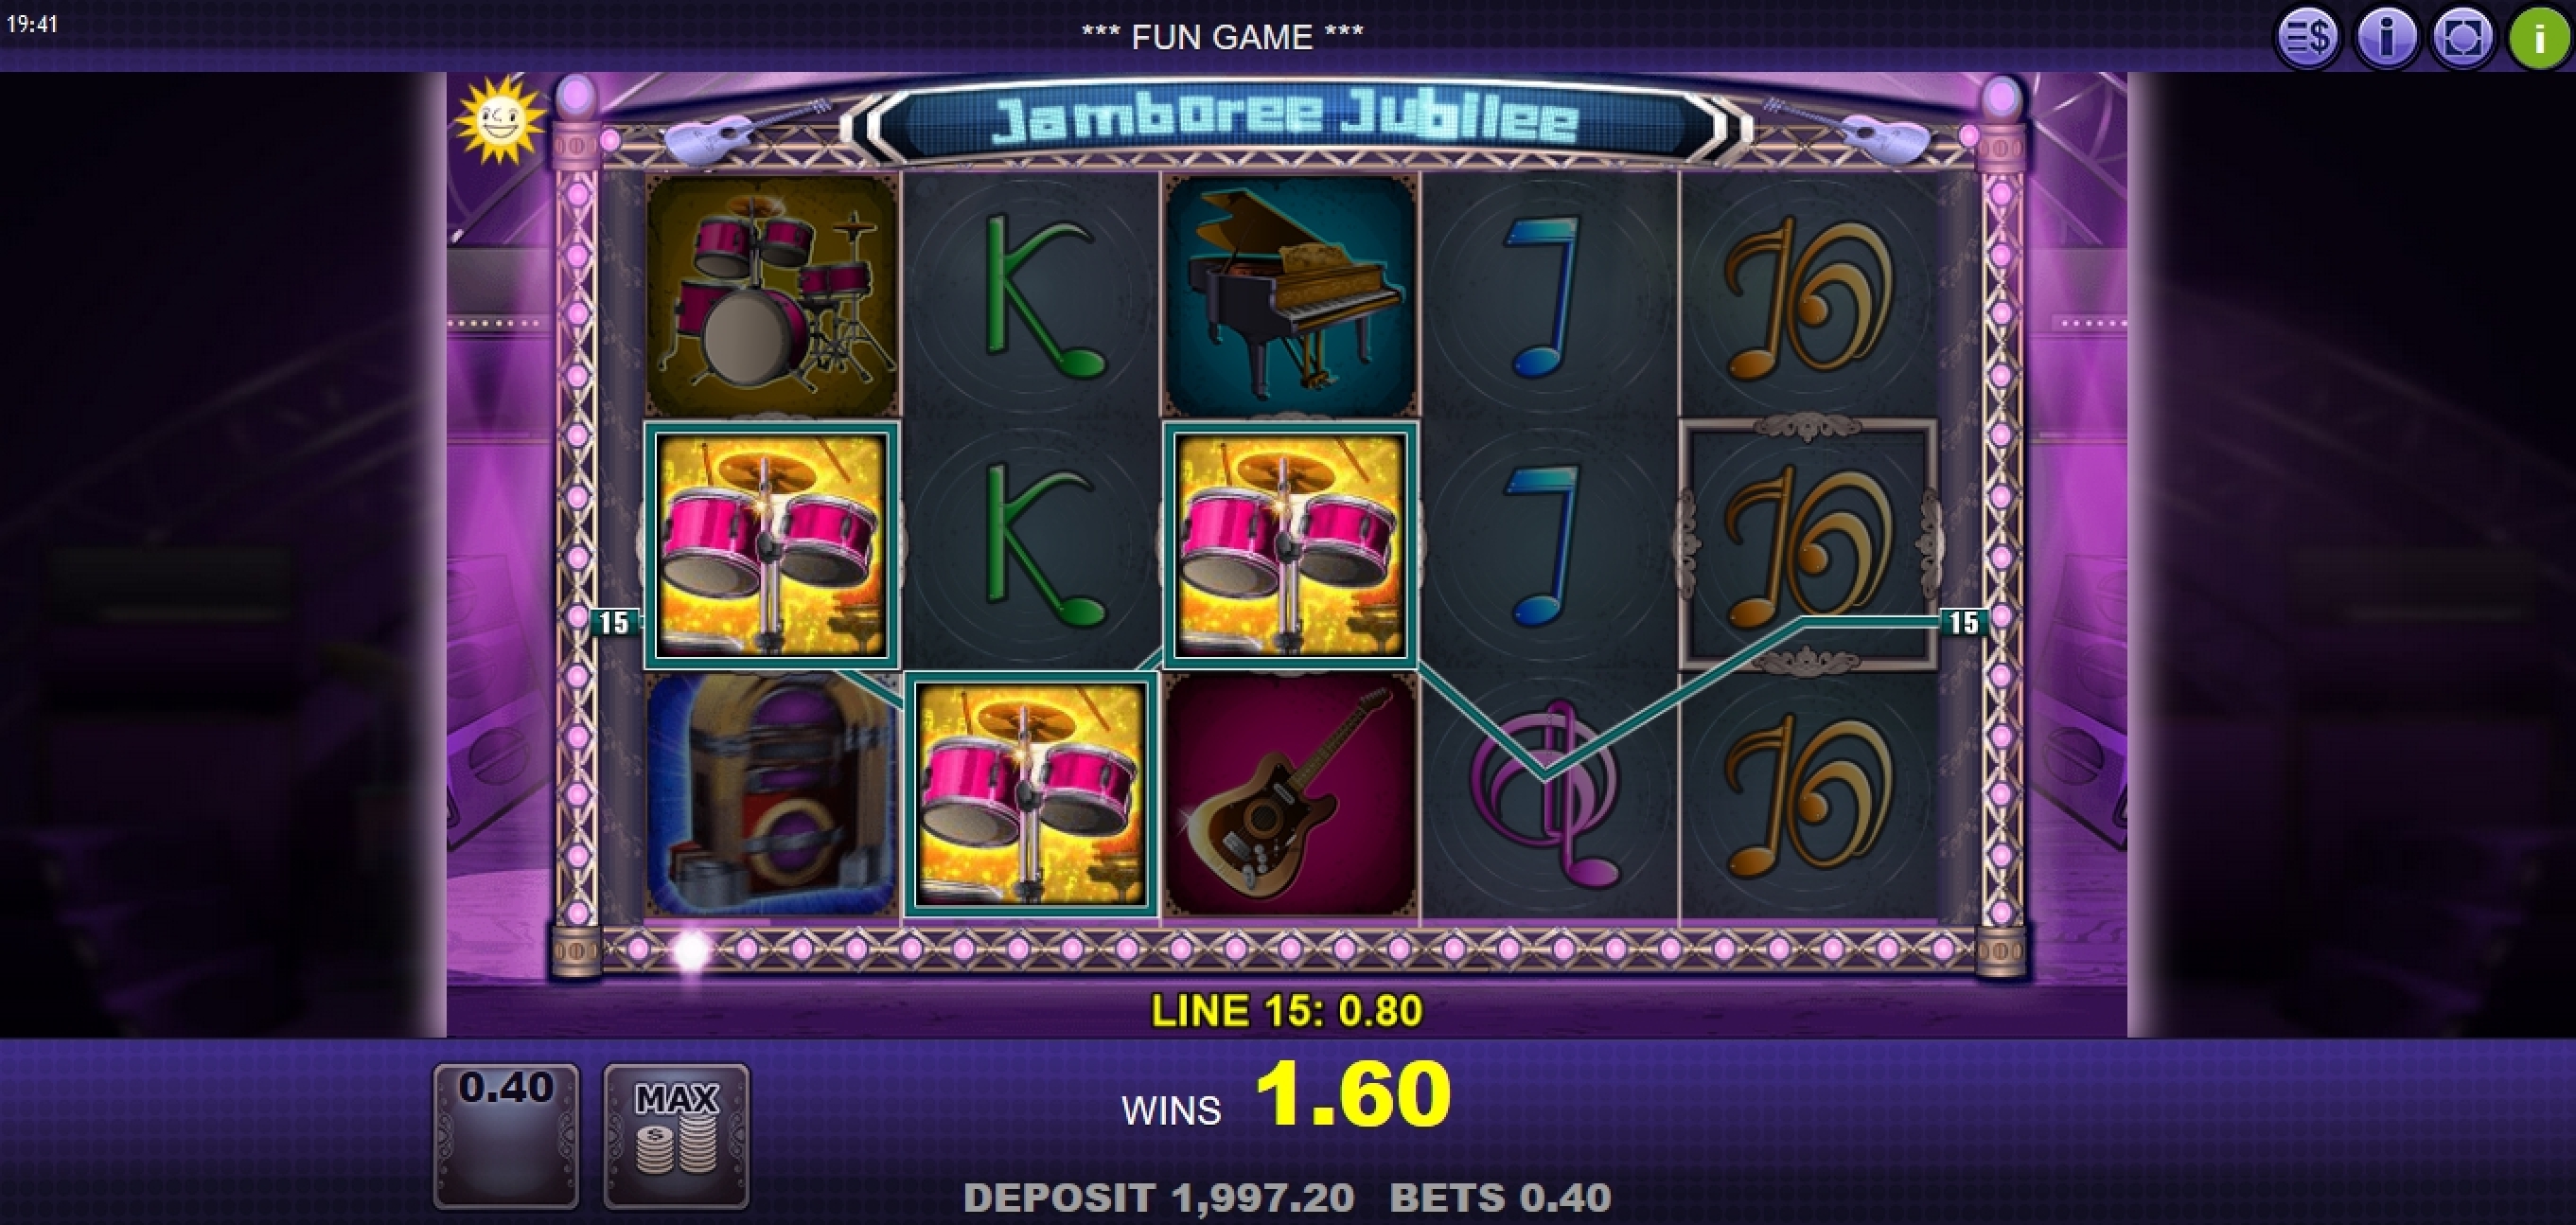 Win Money in Jamboree Jubilee Free Slot Game by edict